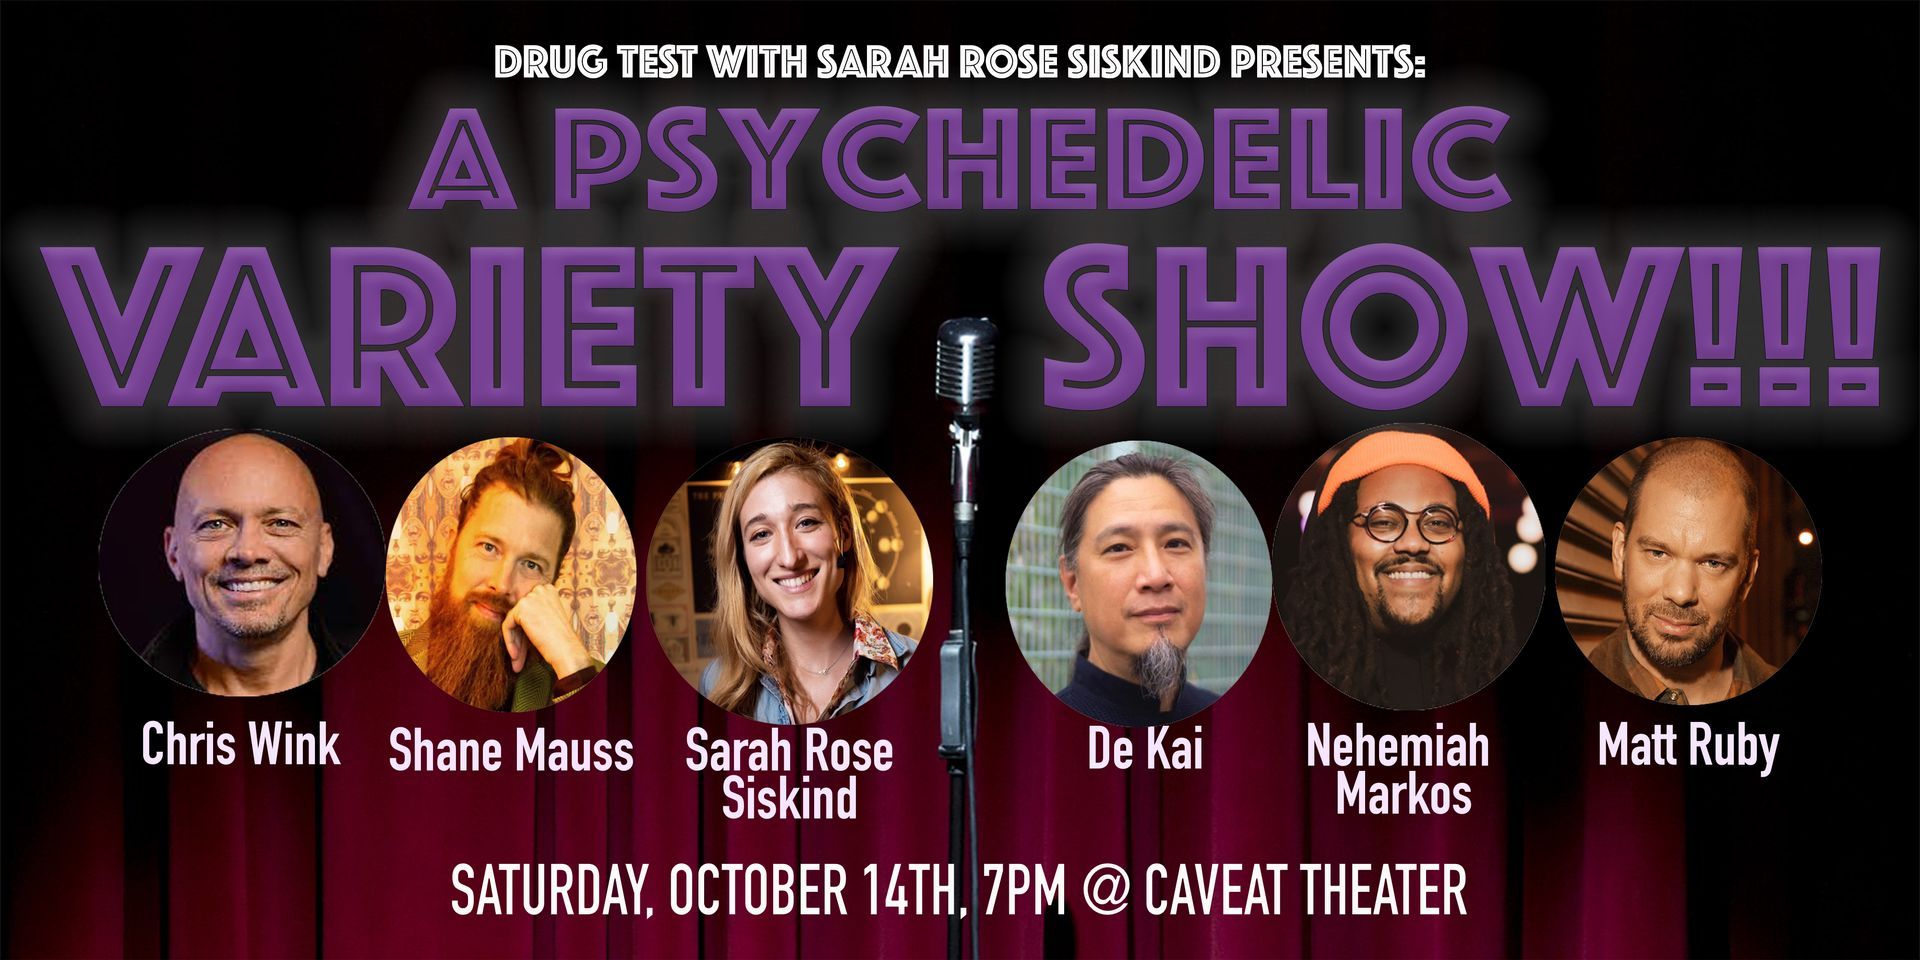 A poster for a psychedelic variety show on saturday october 14th